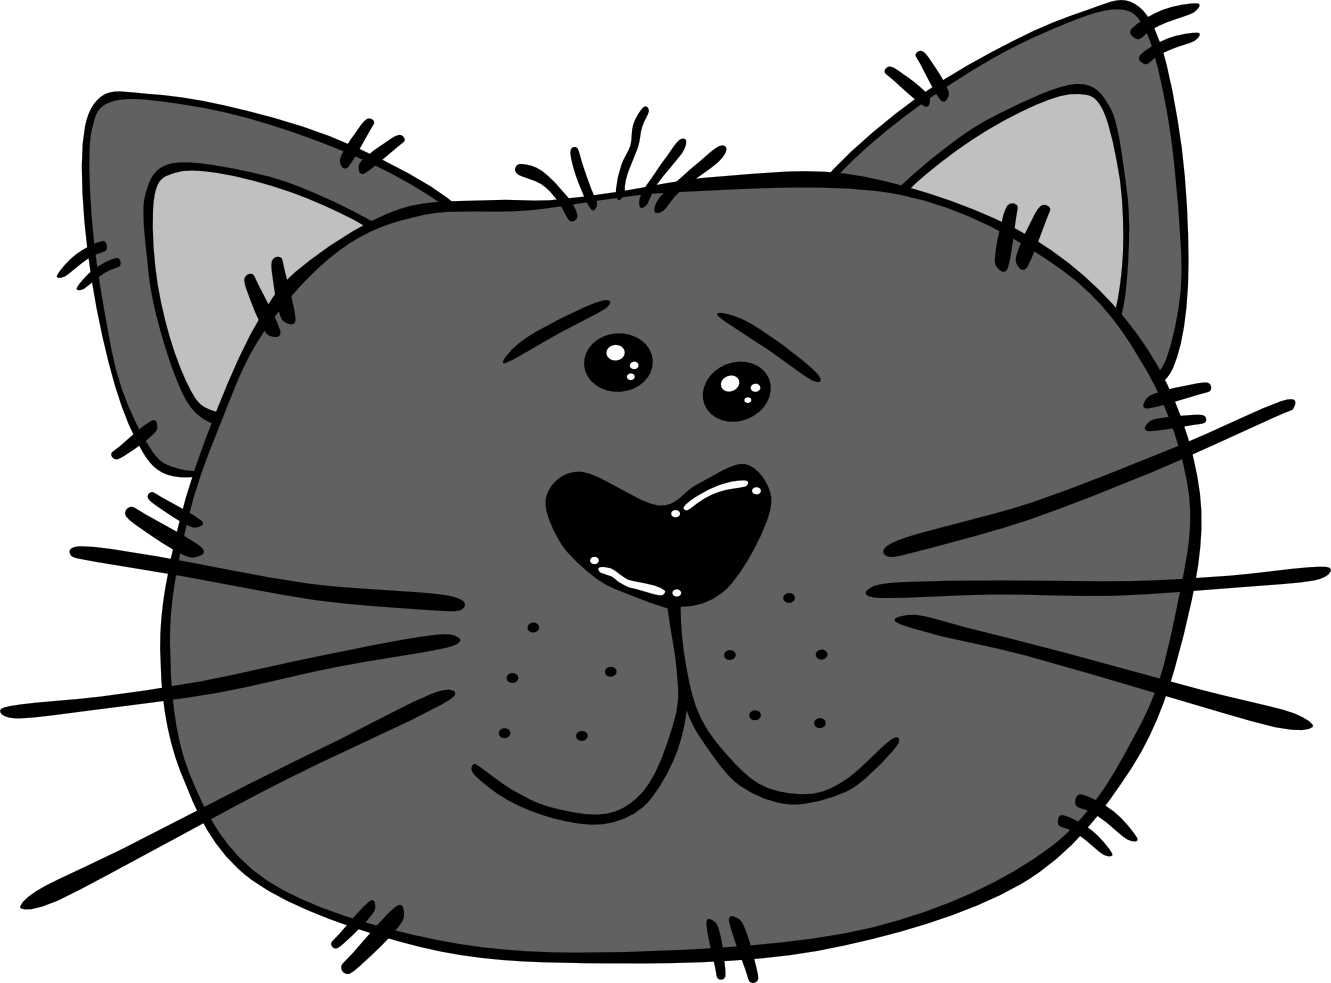 moving cat clipart - photo #23